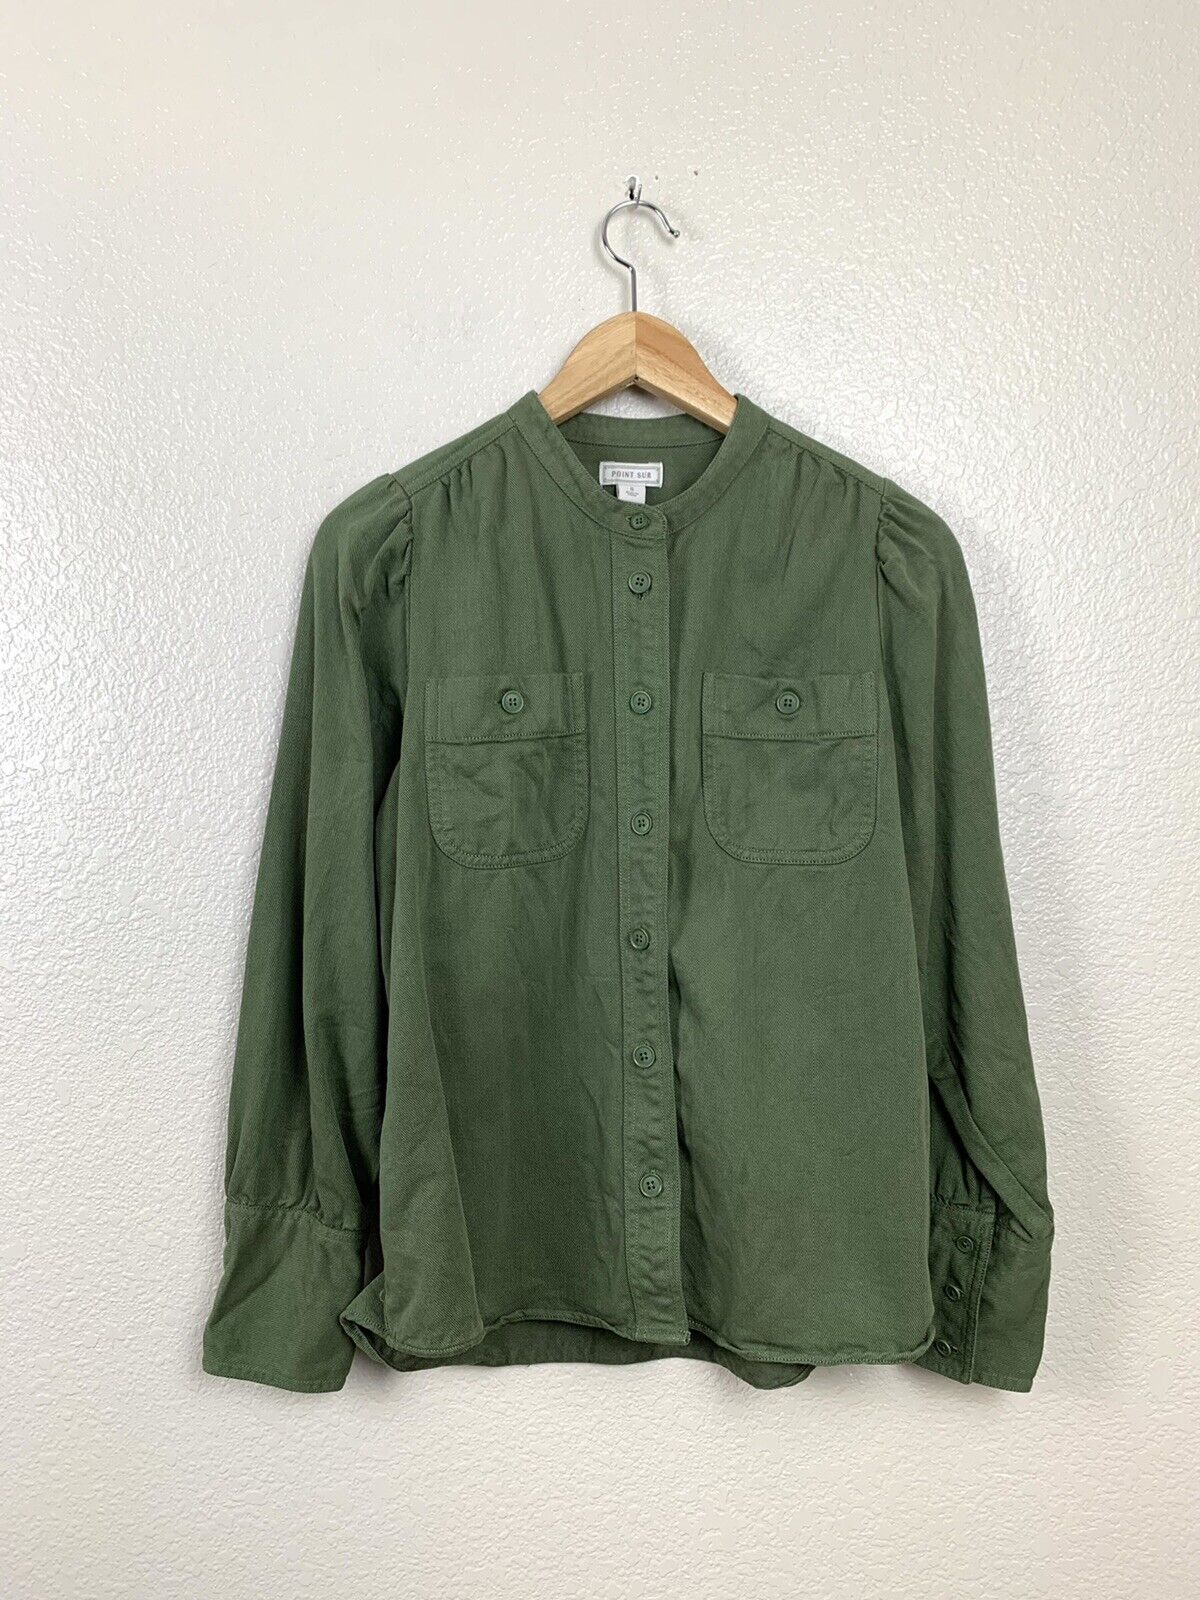 Point Sur Small security S Draped Button Olive Shirt Down J.C Direct sale of manufacturer Twill Green